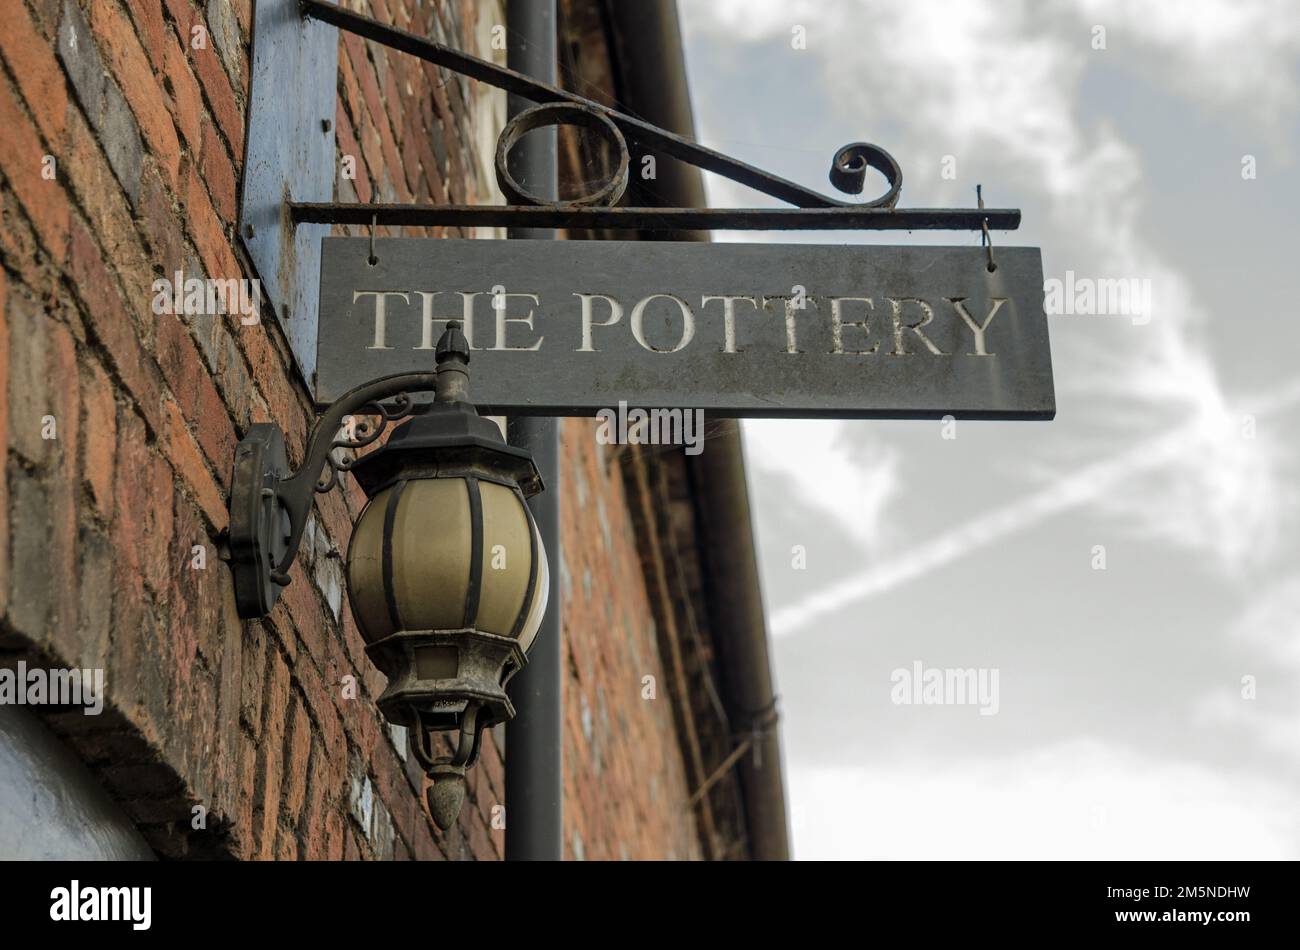 Aldermaston, UK - October 27, 2021:  Historic sign for the pottery in Aldermaston village, Berkshire.  The art pottery created renowned works in the m Stock Photo